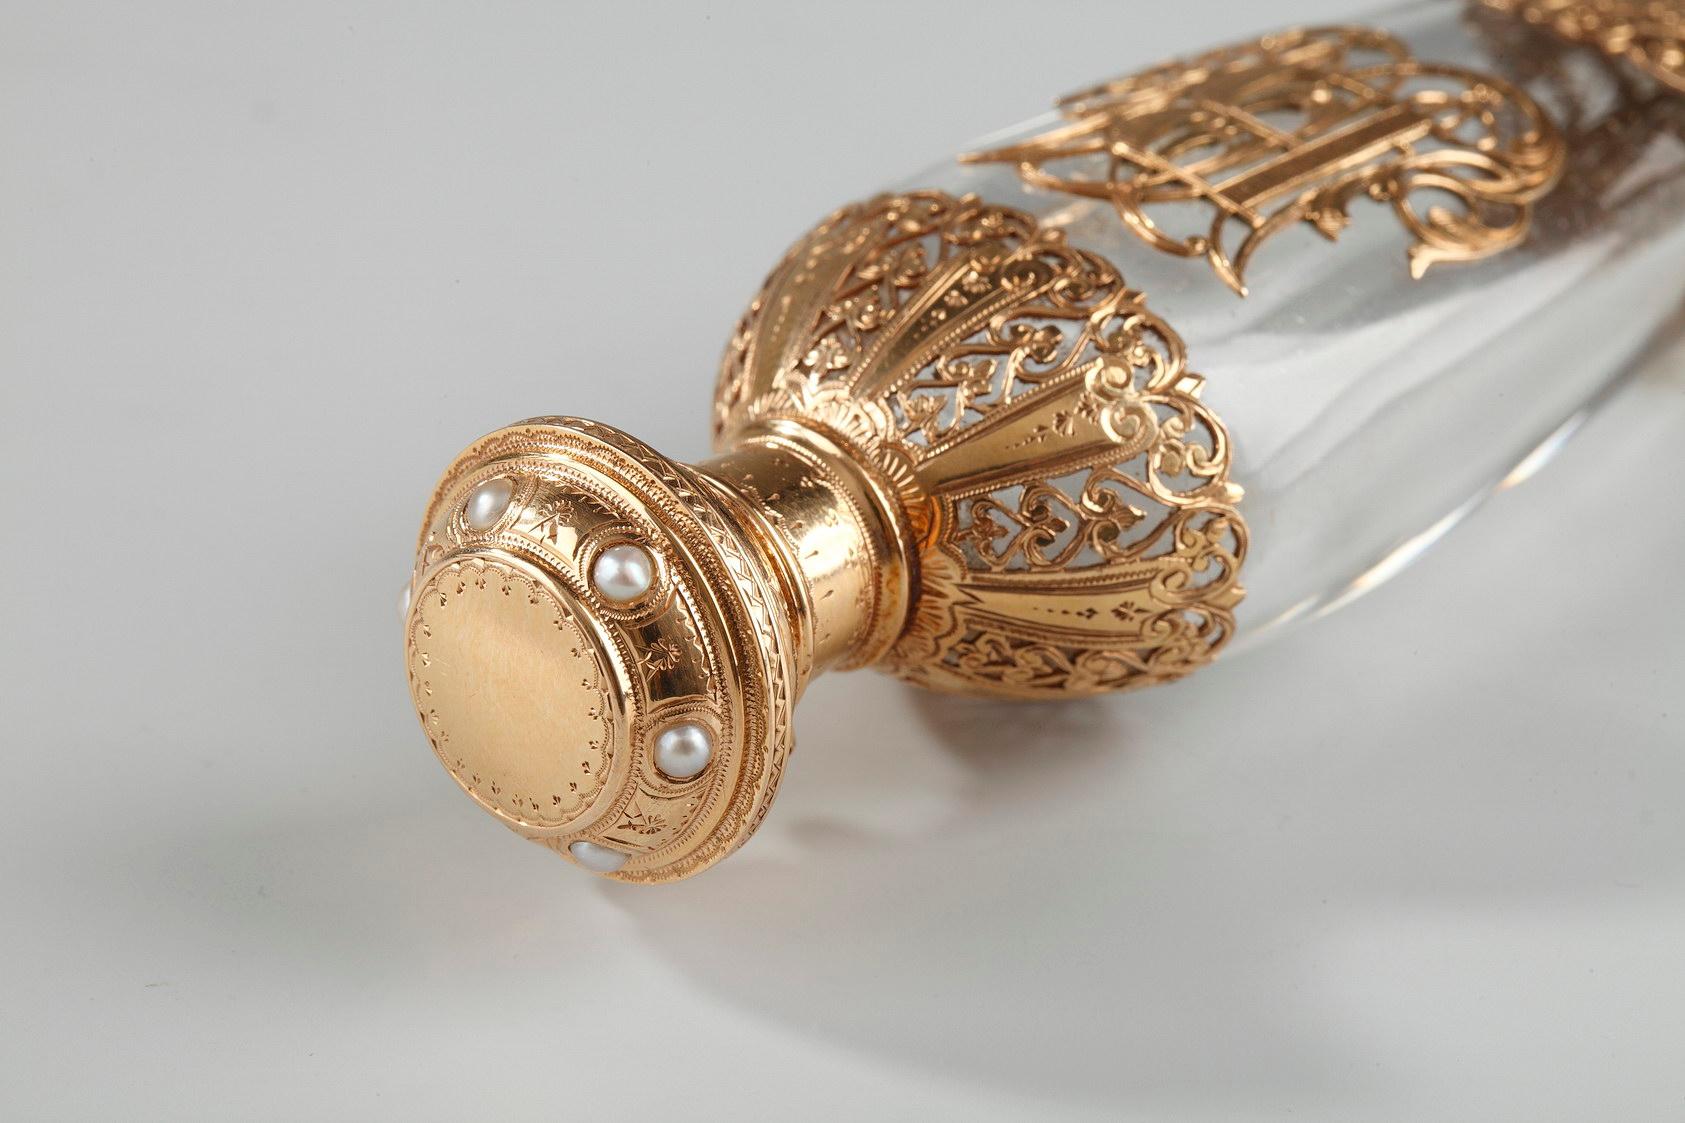 Crystal Flask with Gold and Pearls, Late 19th Century Work For Sale 1